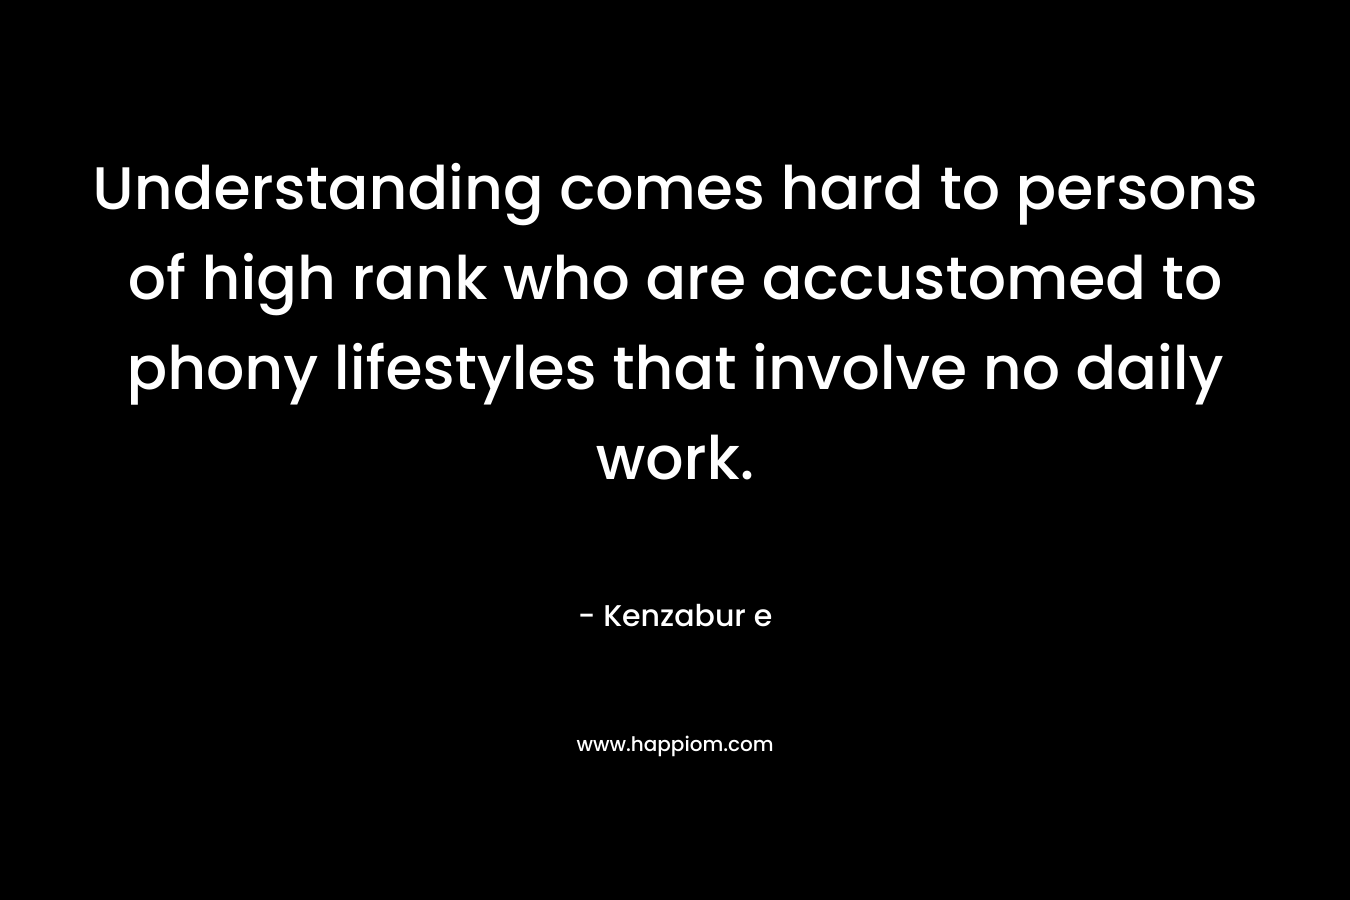 Understanding comes hard to persons of high rank who are accustomed to phony lifestyles that involve no daily work. – Kenzabur e